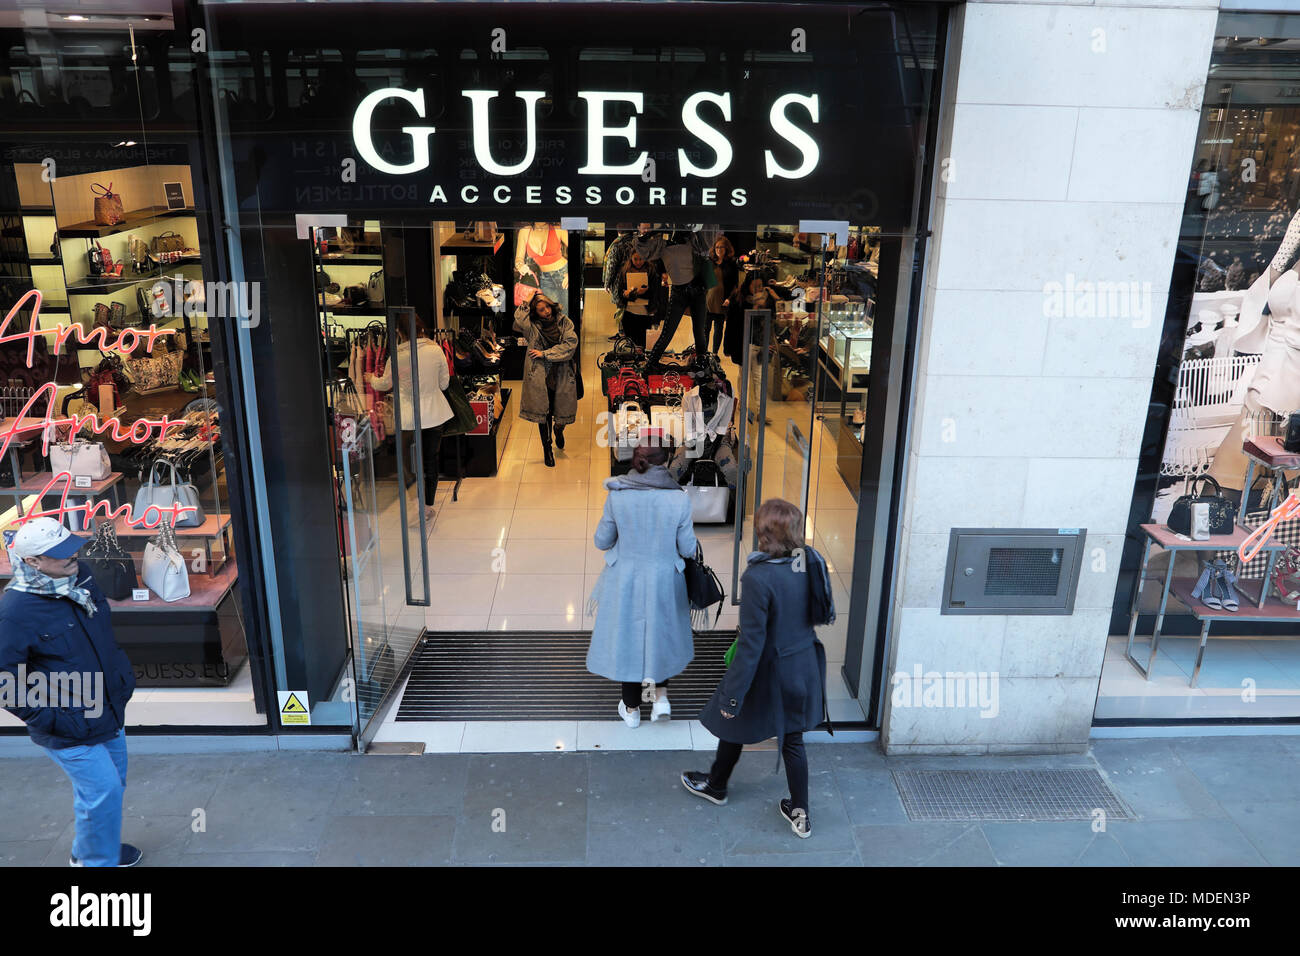 Shoppers walking into entrance of Guess Accessories a high street store in Knightsbridge London England, UK KATHY DEWITT Stock Photo - Alamy